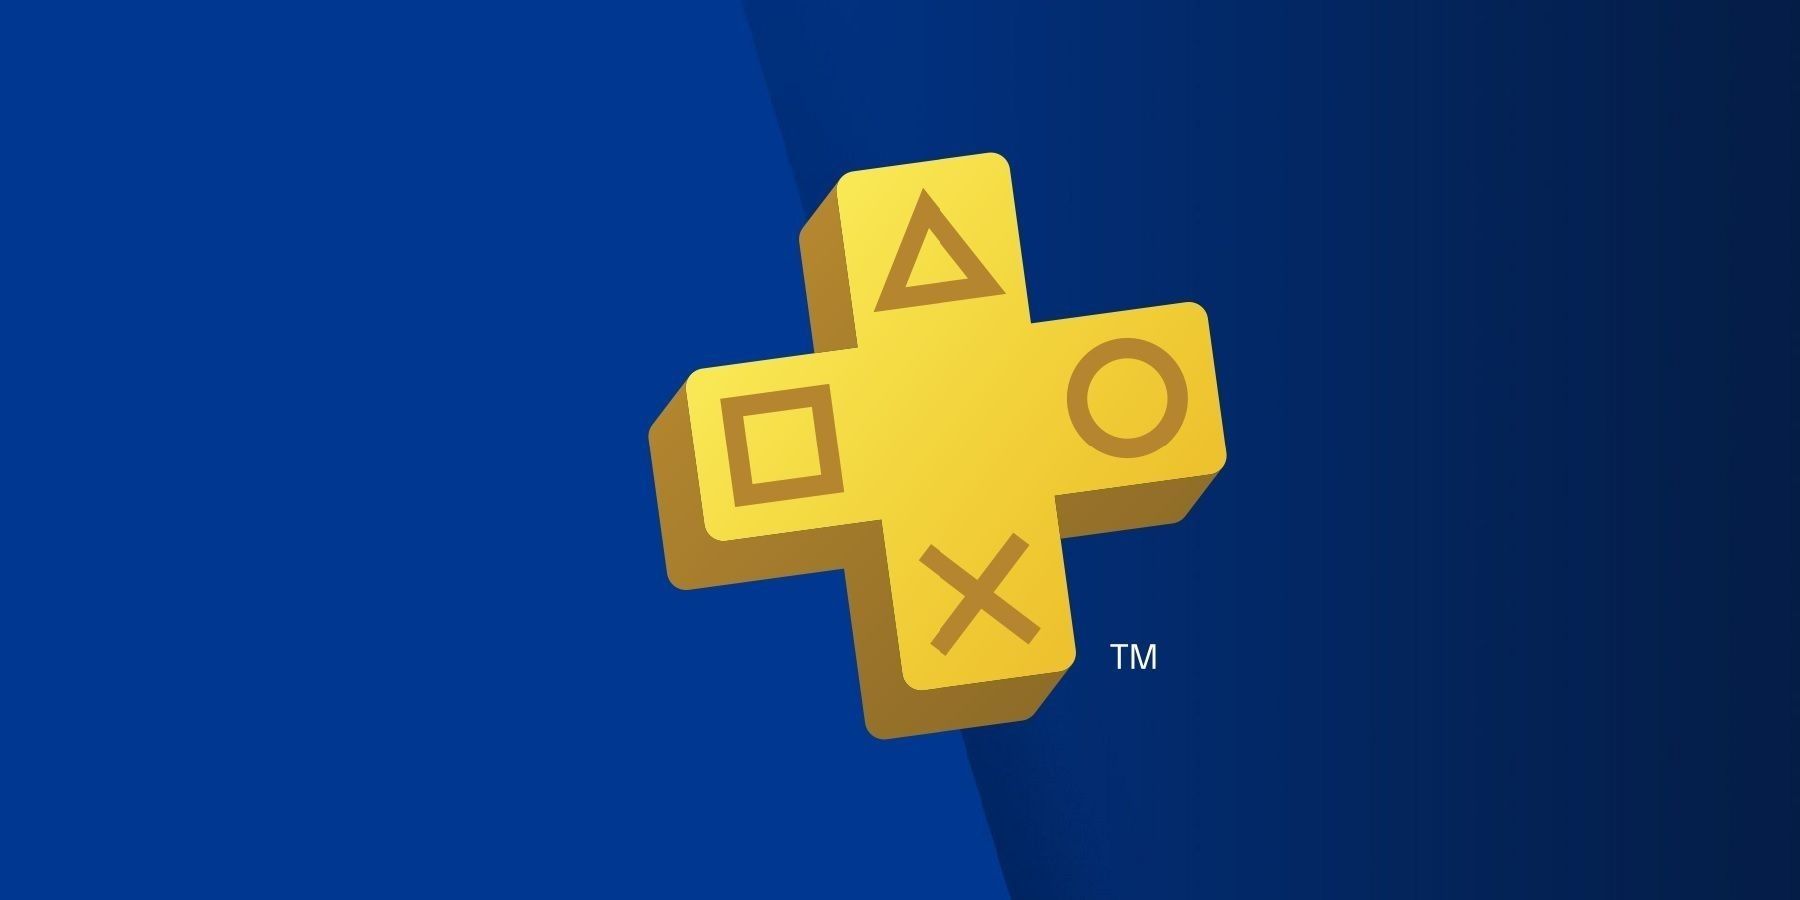 PS Plus adds 2021's Game of the Year, but loses Stray